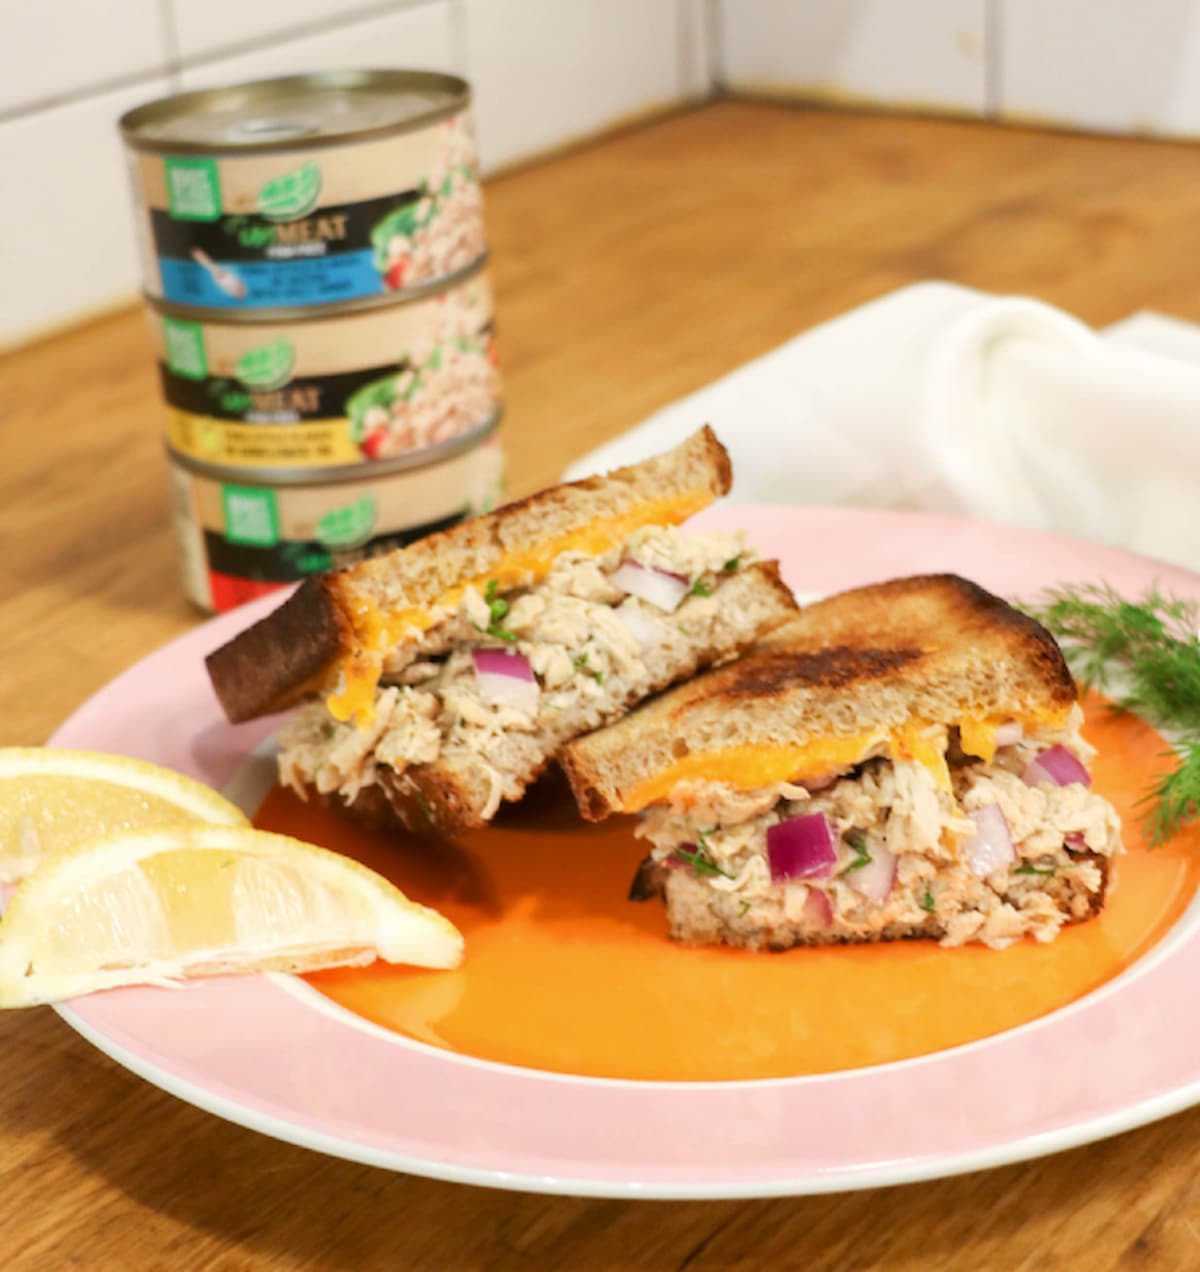 Vegan tuna melt sandwiches on a plate with unMEAT vegan tuna cans behind it.